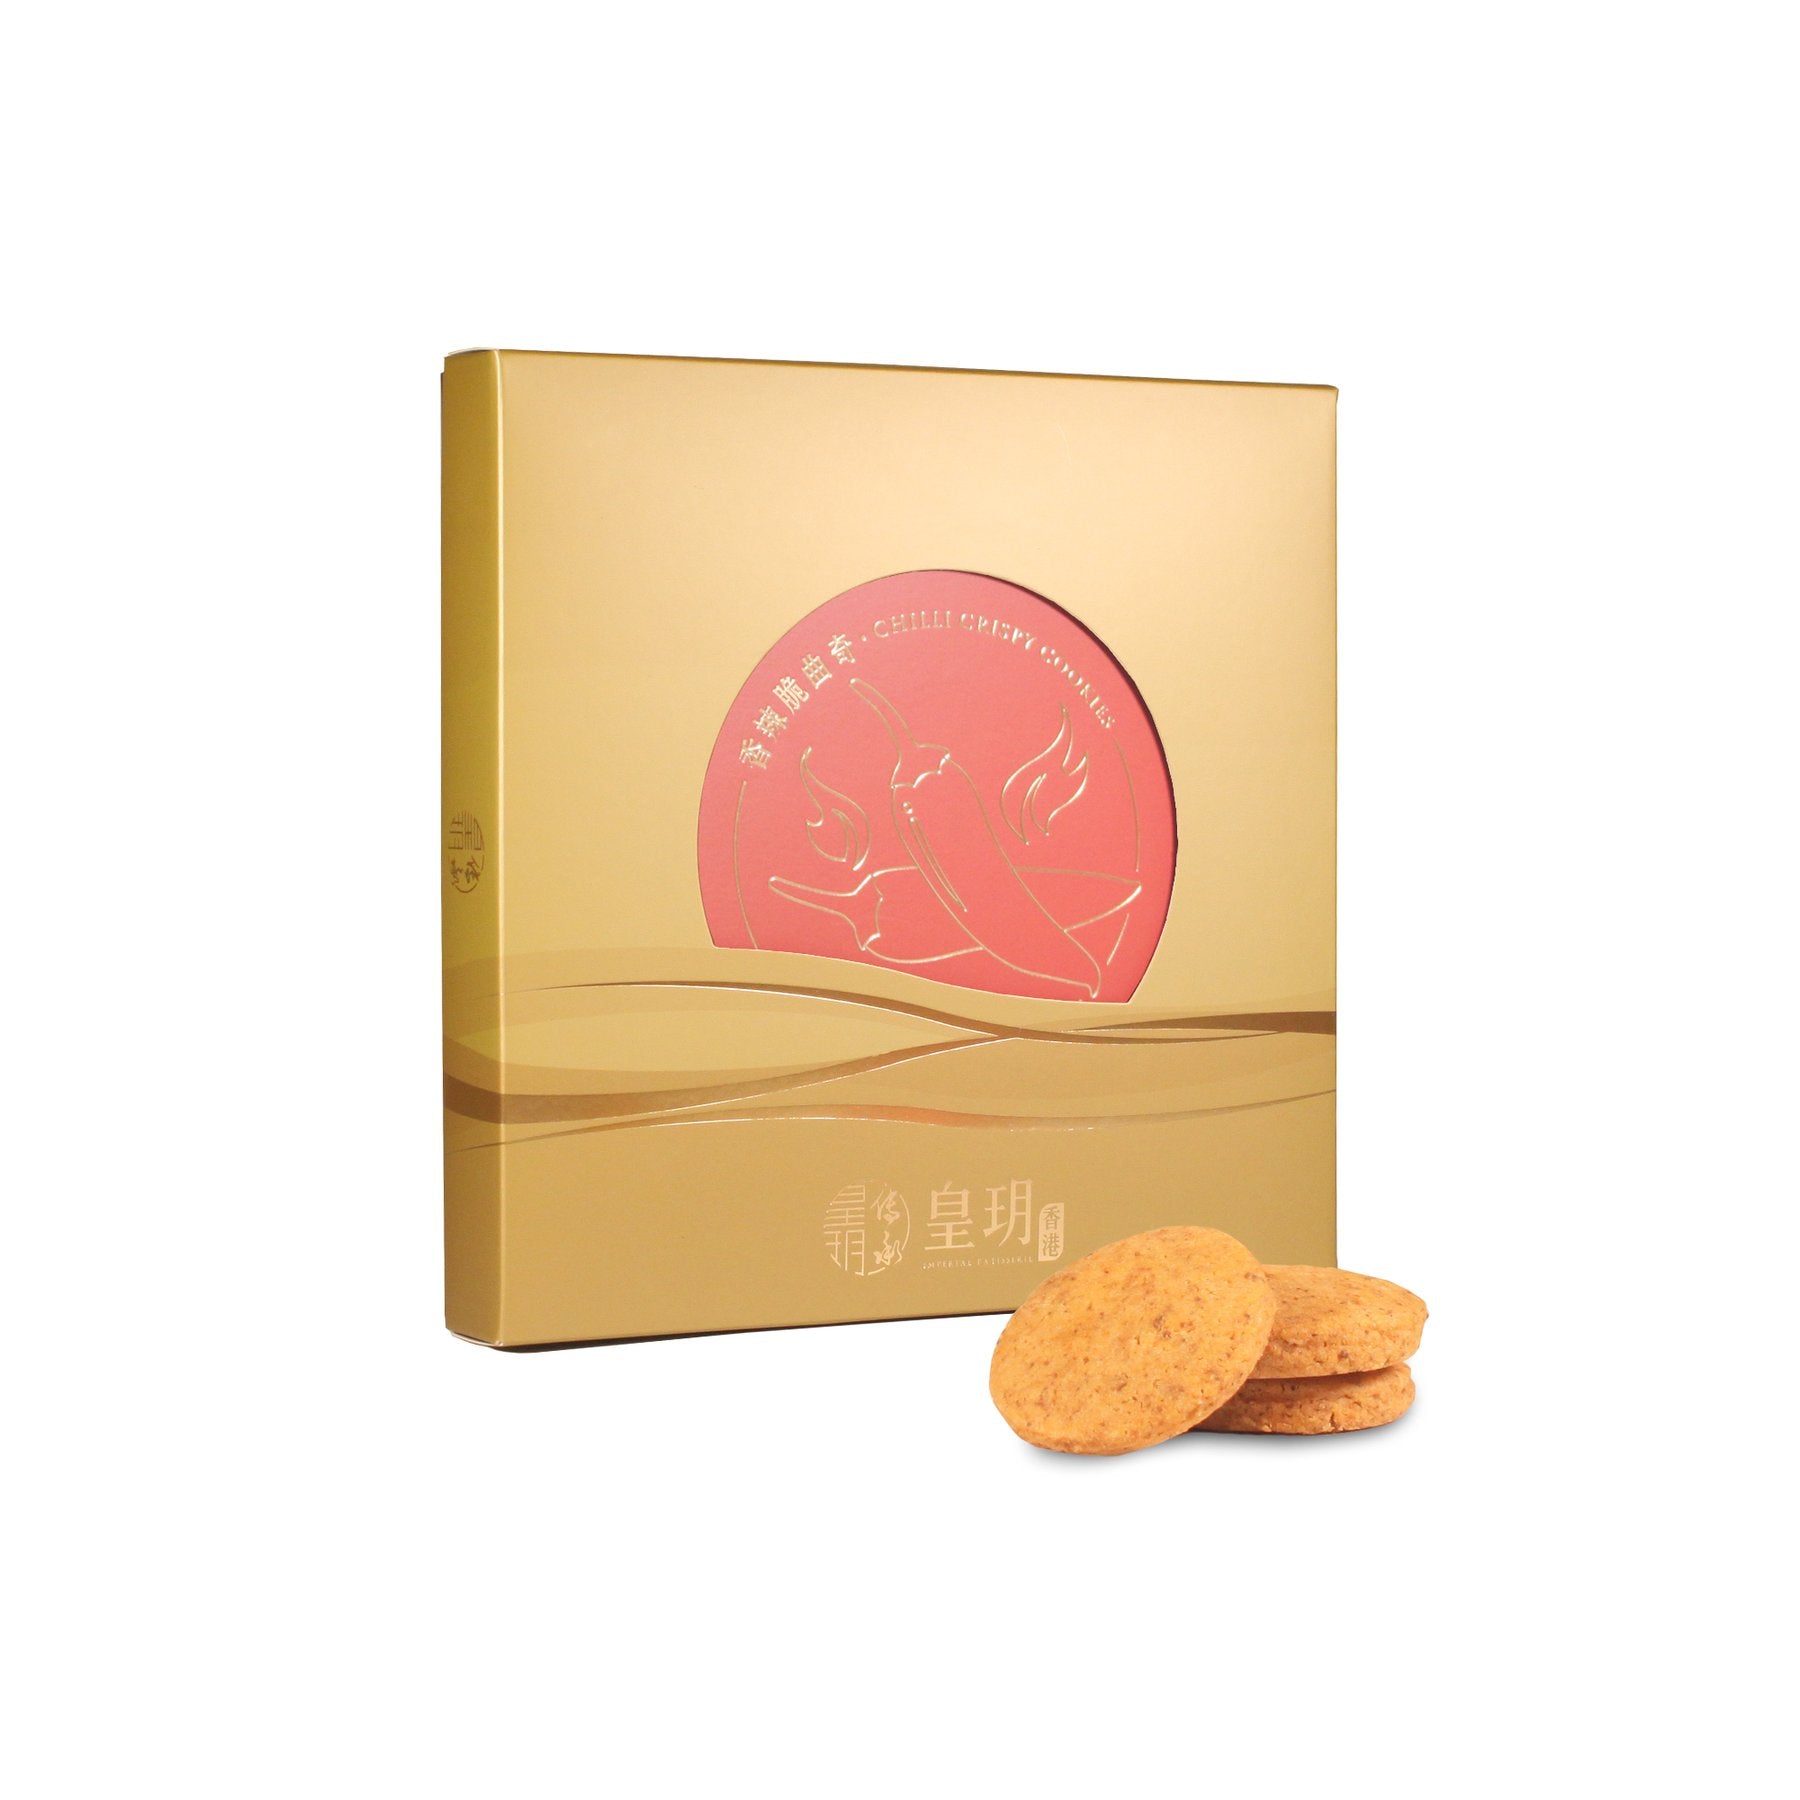 Imperial Patisserie Spicy Crispy Cookies Hardcover Gift Box 皇玥 香辣脆曲奇精裝禮盒